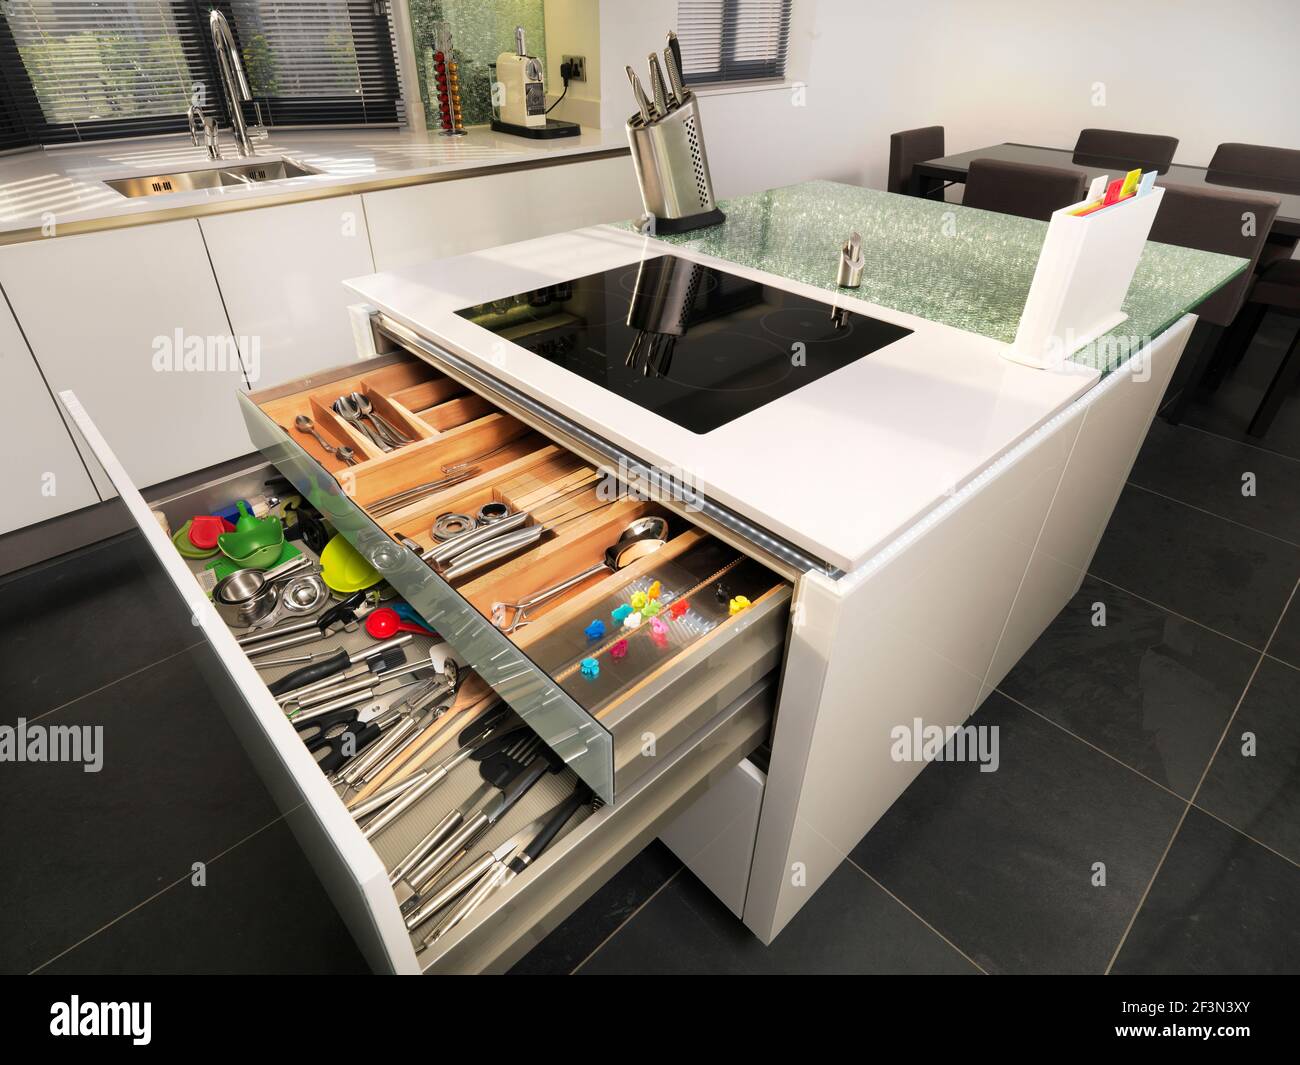 A modern kitchen central island with open drawer detail Stock Photo